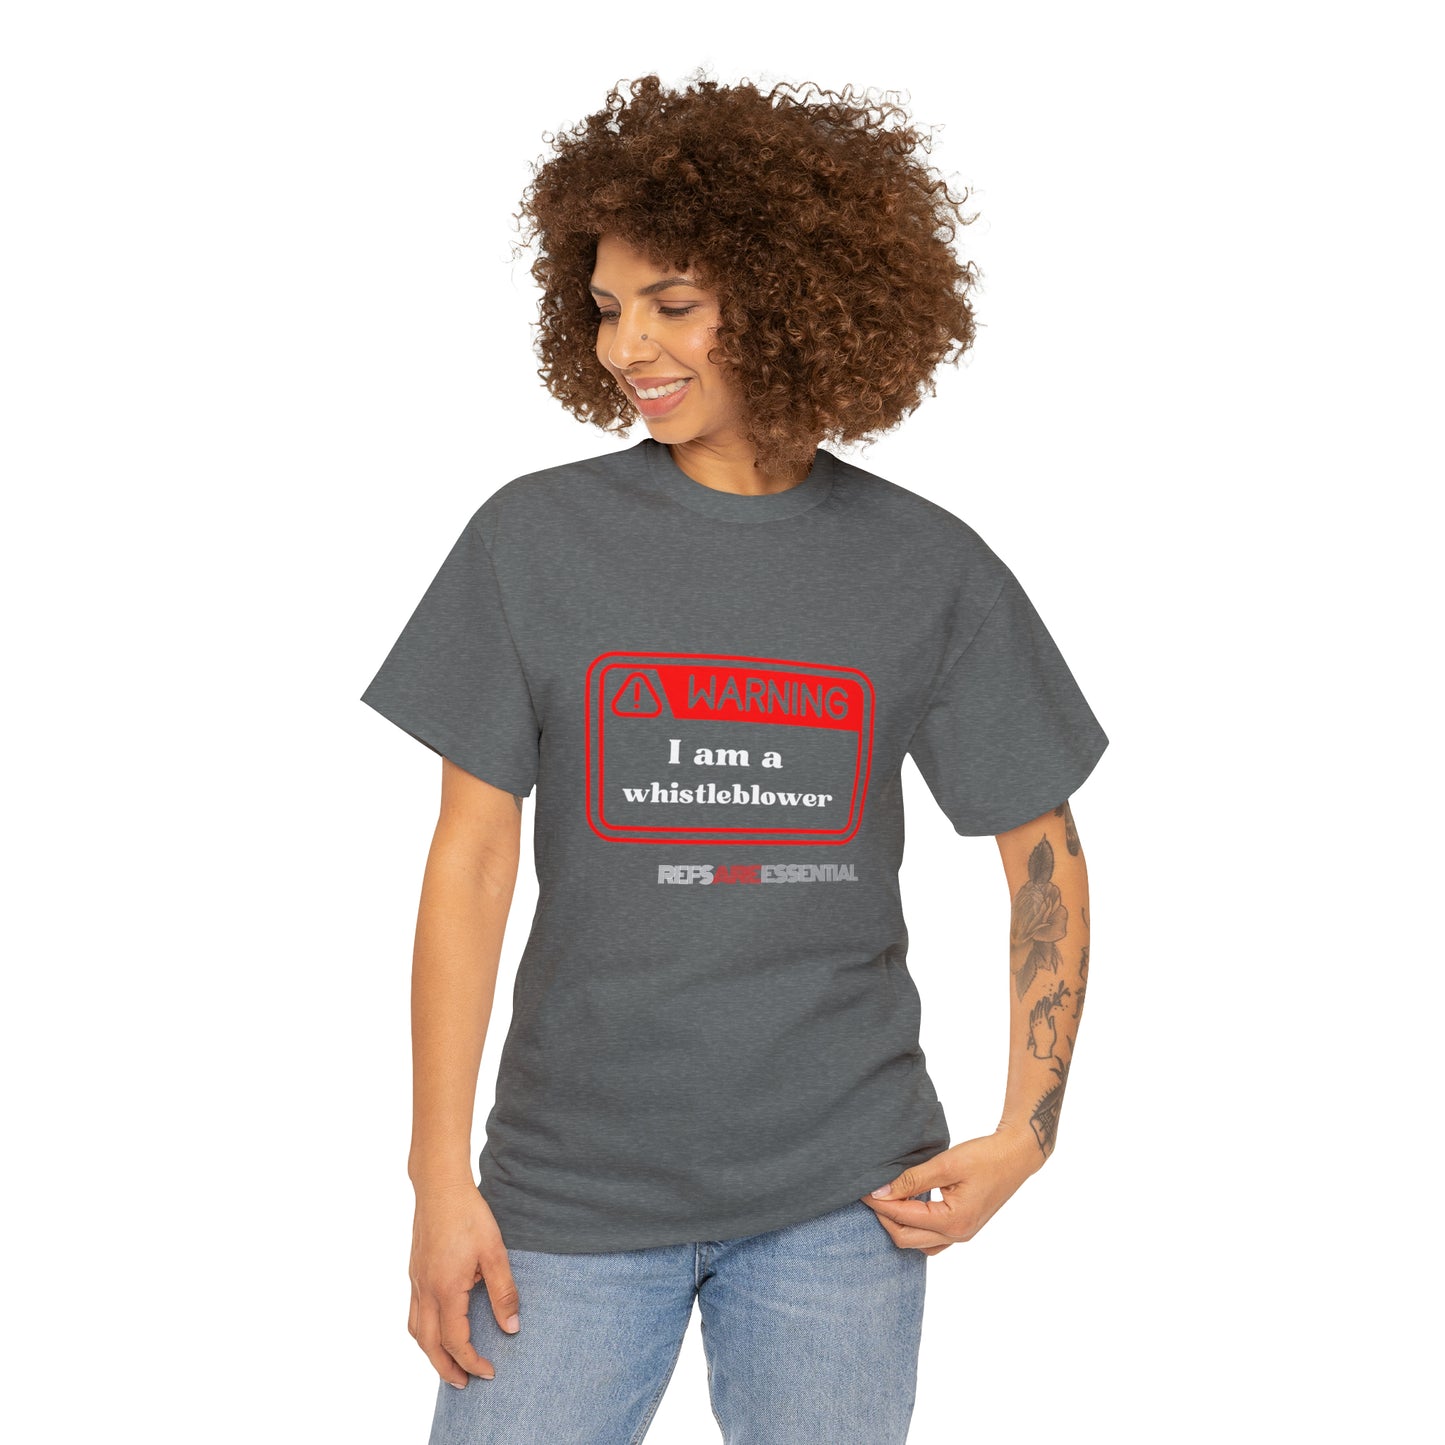 Whistleblower Unisex Cotton Tee | Perfect Gift for Refs | Referee t-shirt | For sports officials | Funny Referee shirt | Warning shirt